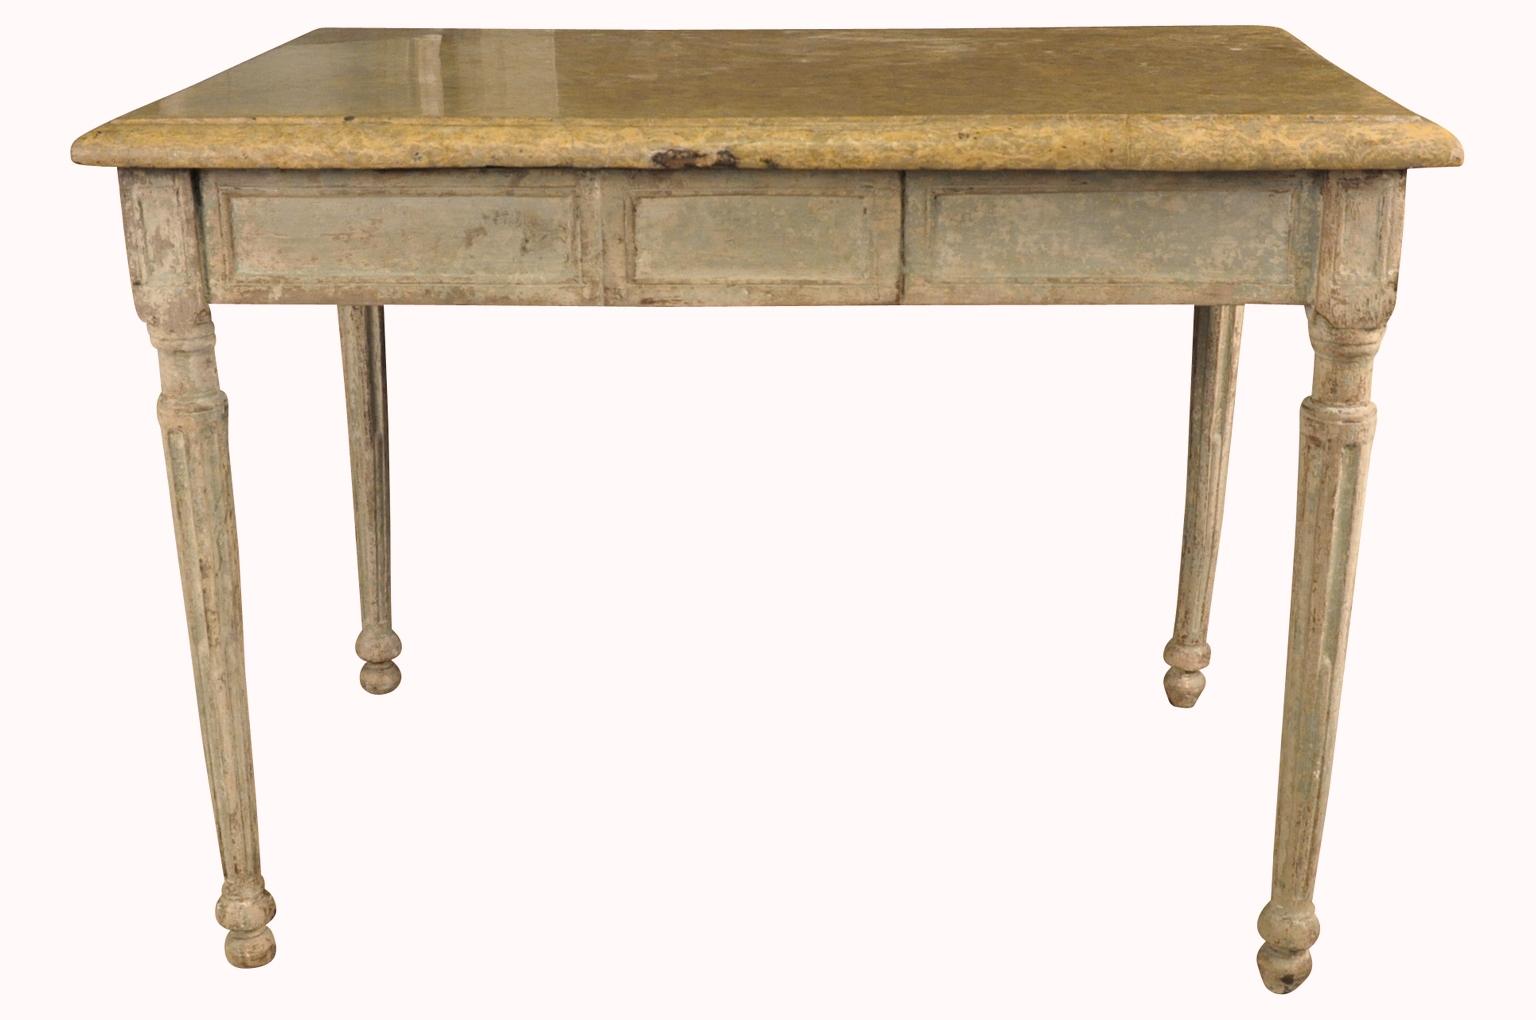 Painted Outstanding 18th Century Period Louis XVI Table